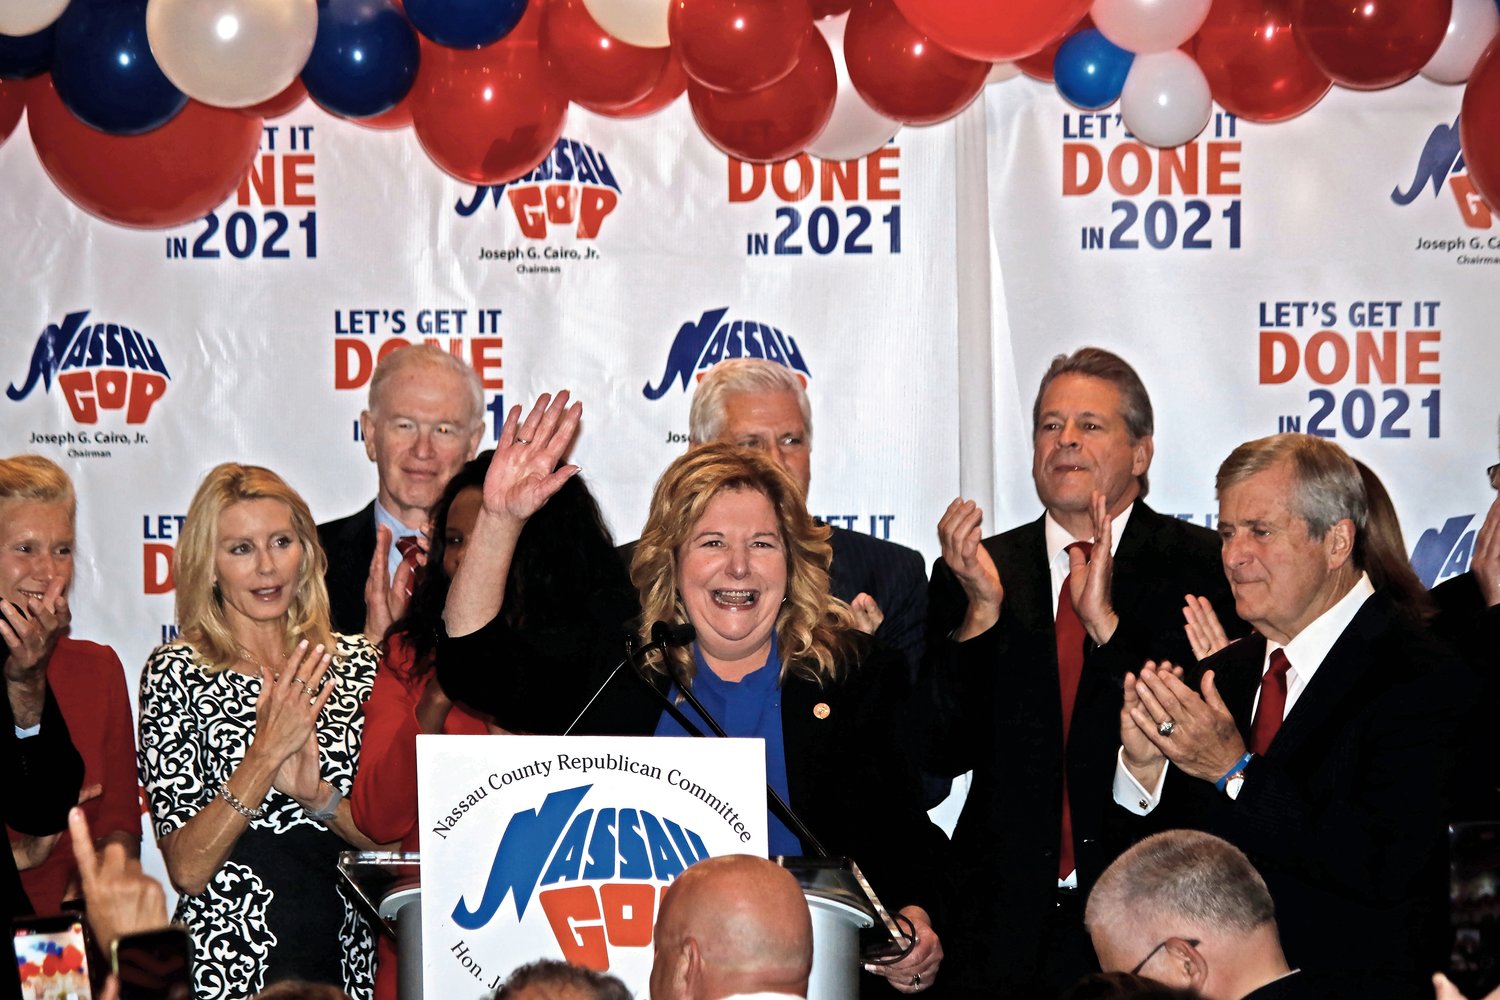 Republican Anne Donnelly won the Nassau County District Attorney race with more than 60 percent of the vote against Democrat State Senator Todd Kaminsky.